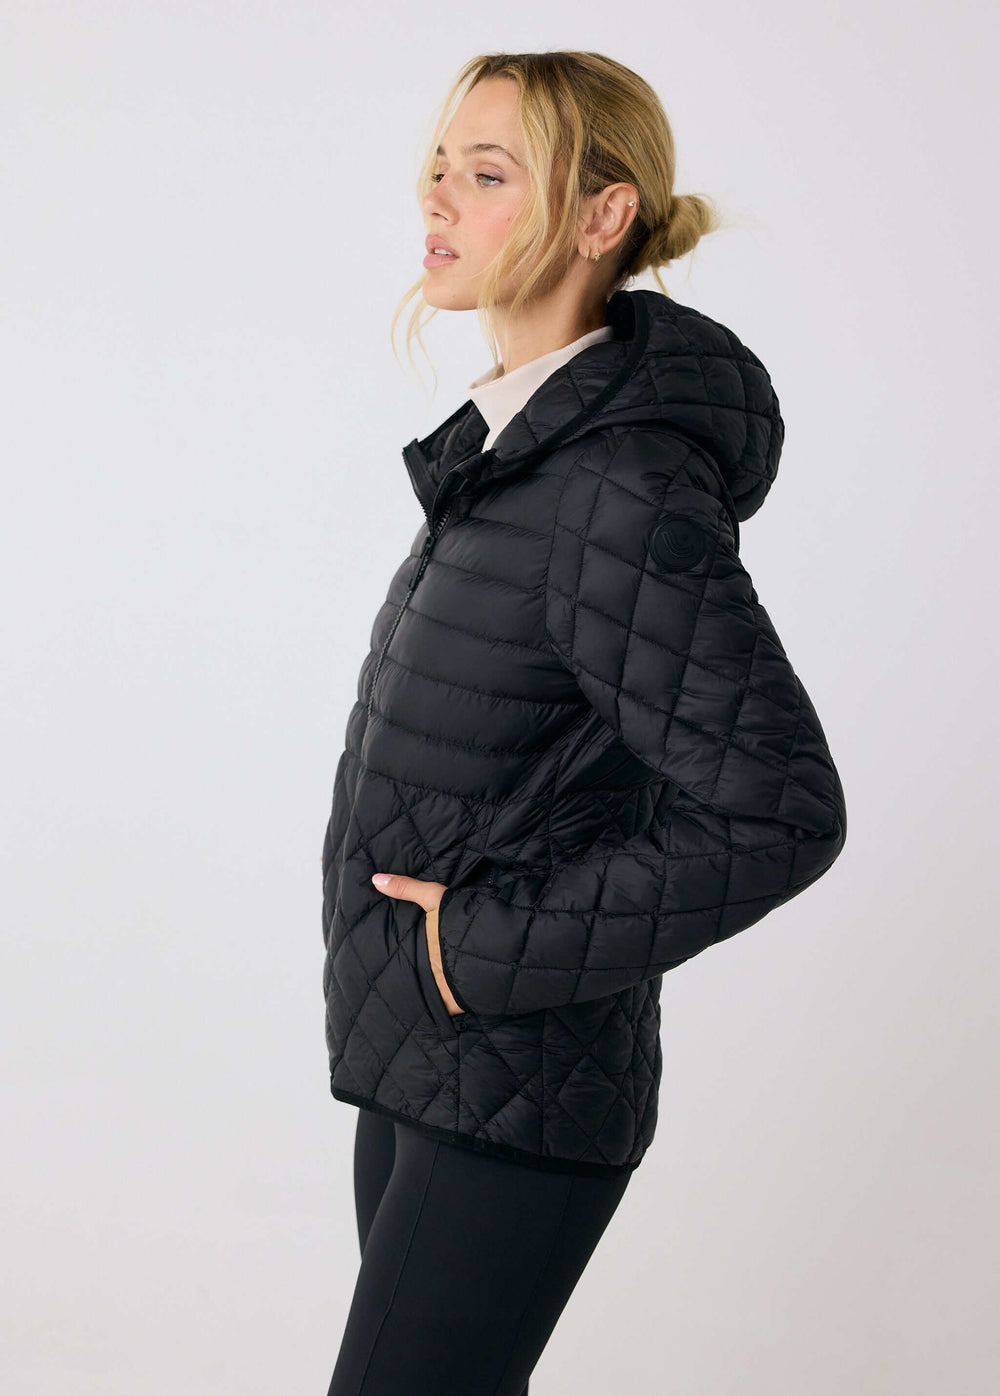 The Base Insulated Jacket | Women's Packable Fall Jackets